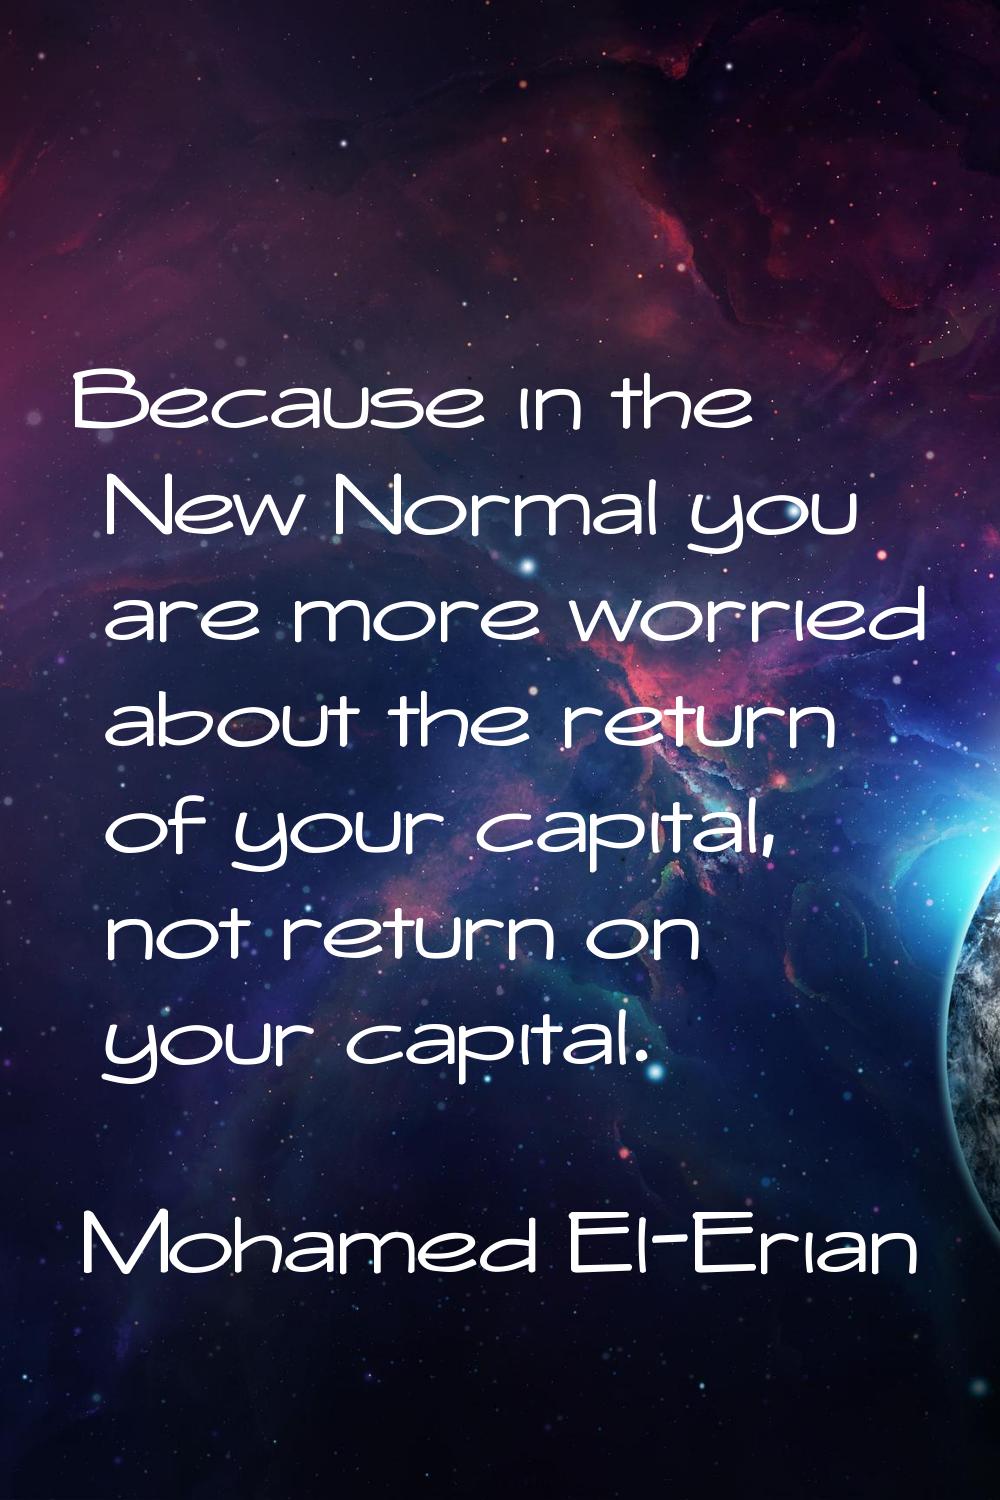 Because in the New Normal you are more worried about the return of your capital, not return on your